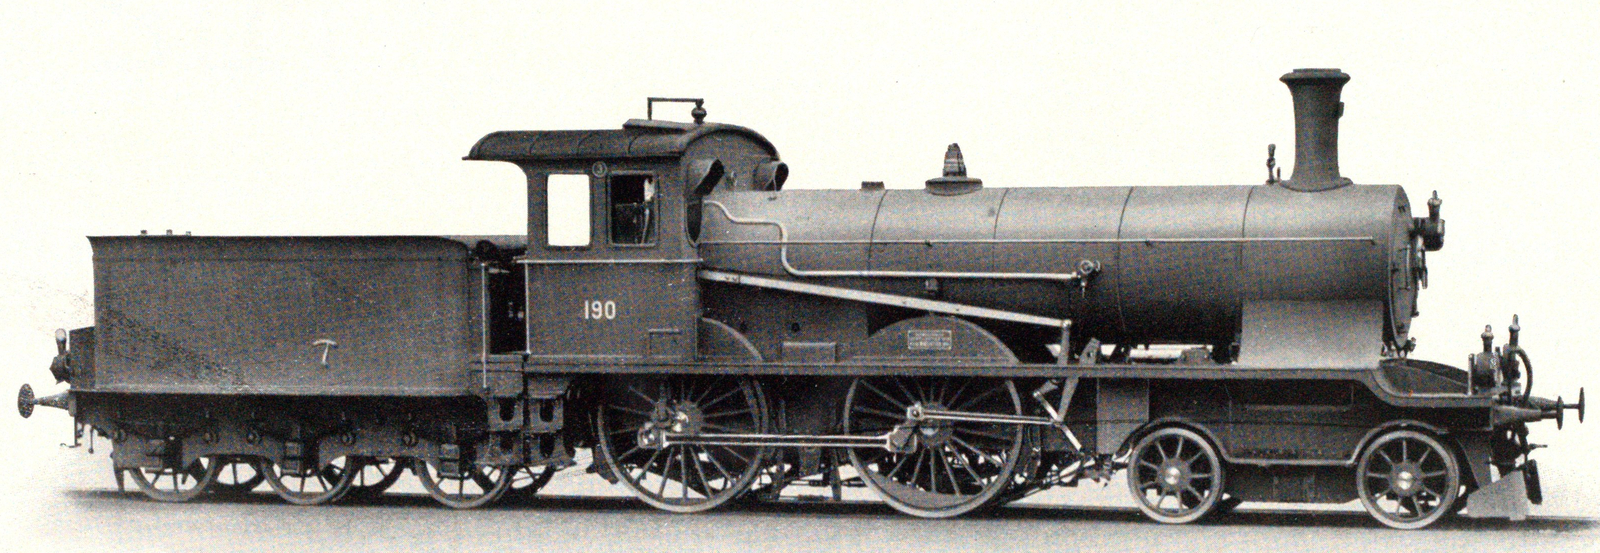 No. 190 in the SLM type sheet